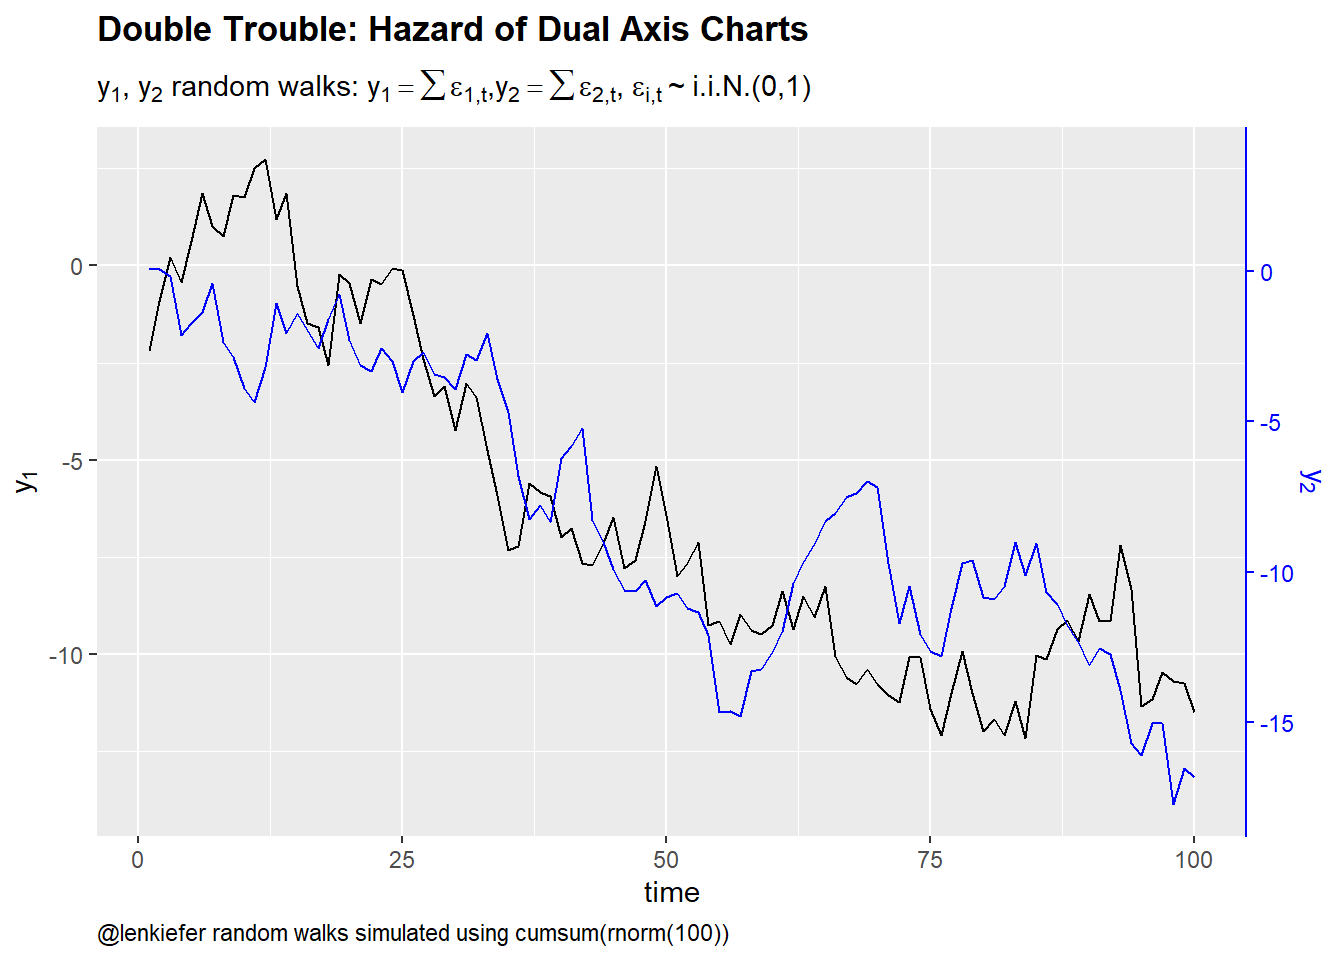 Dual axis charts and spurious correlation